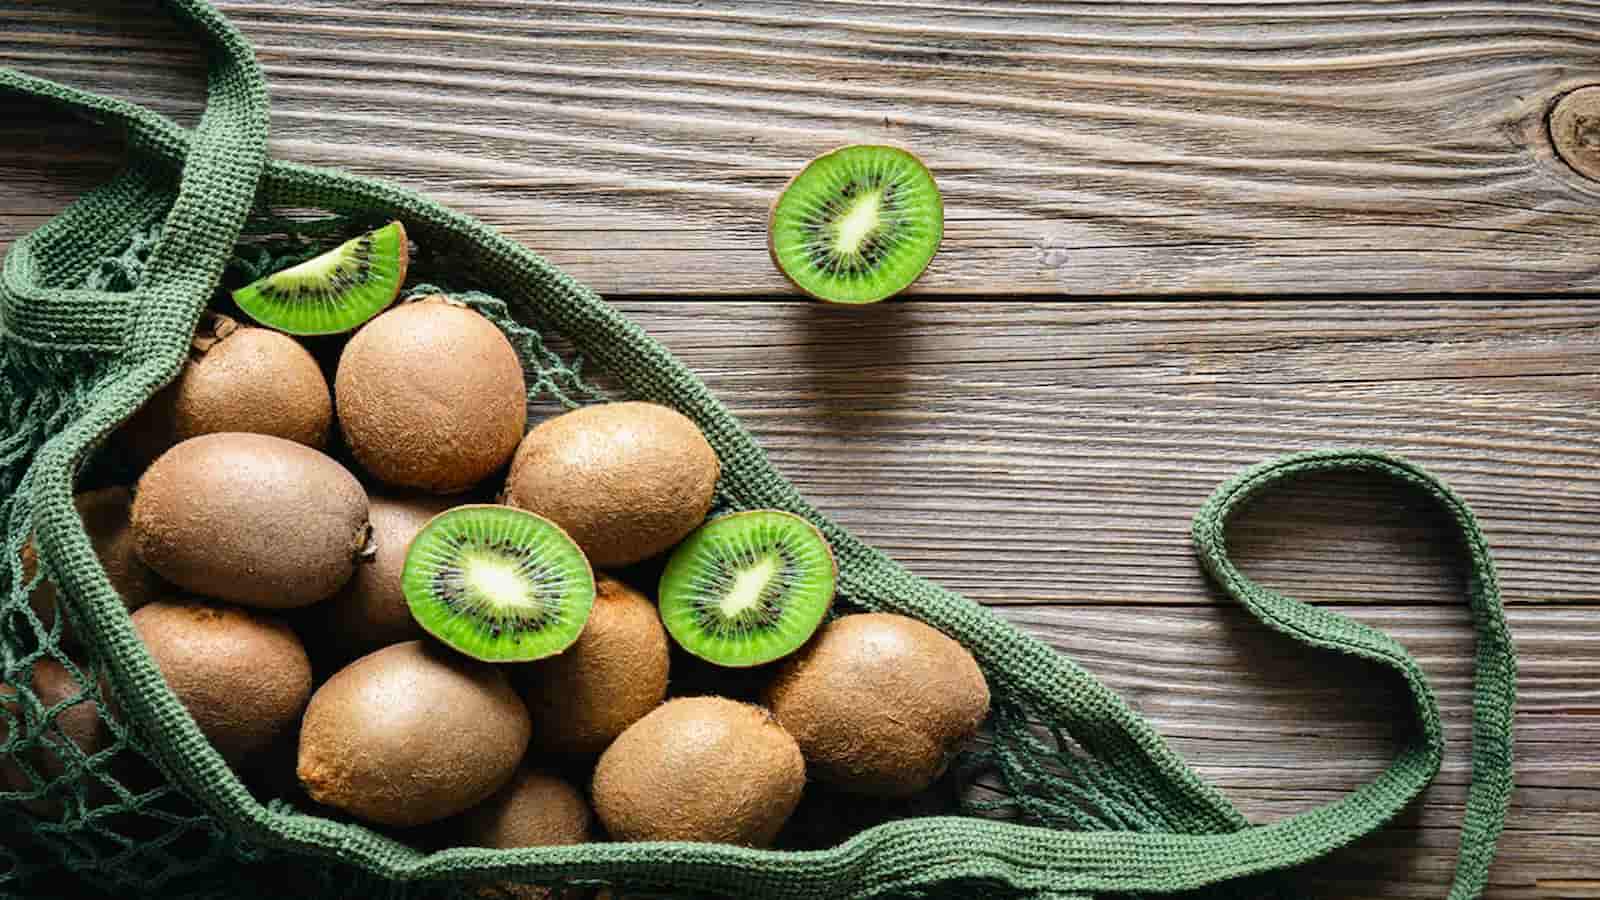 Discover the Top 8 Health Benefits of Kiwi Fruit